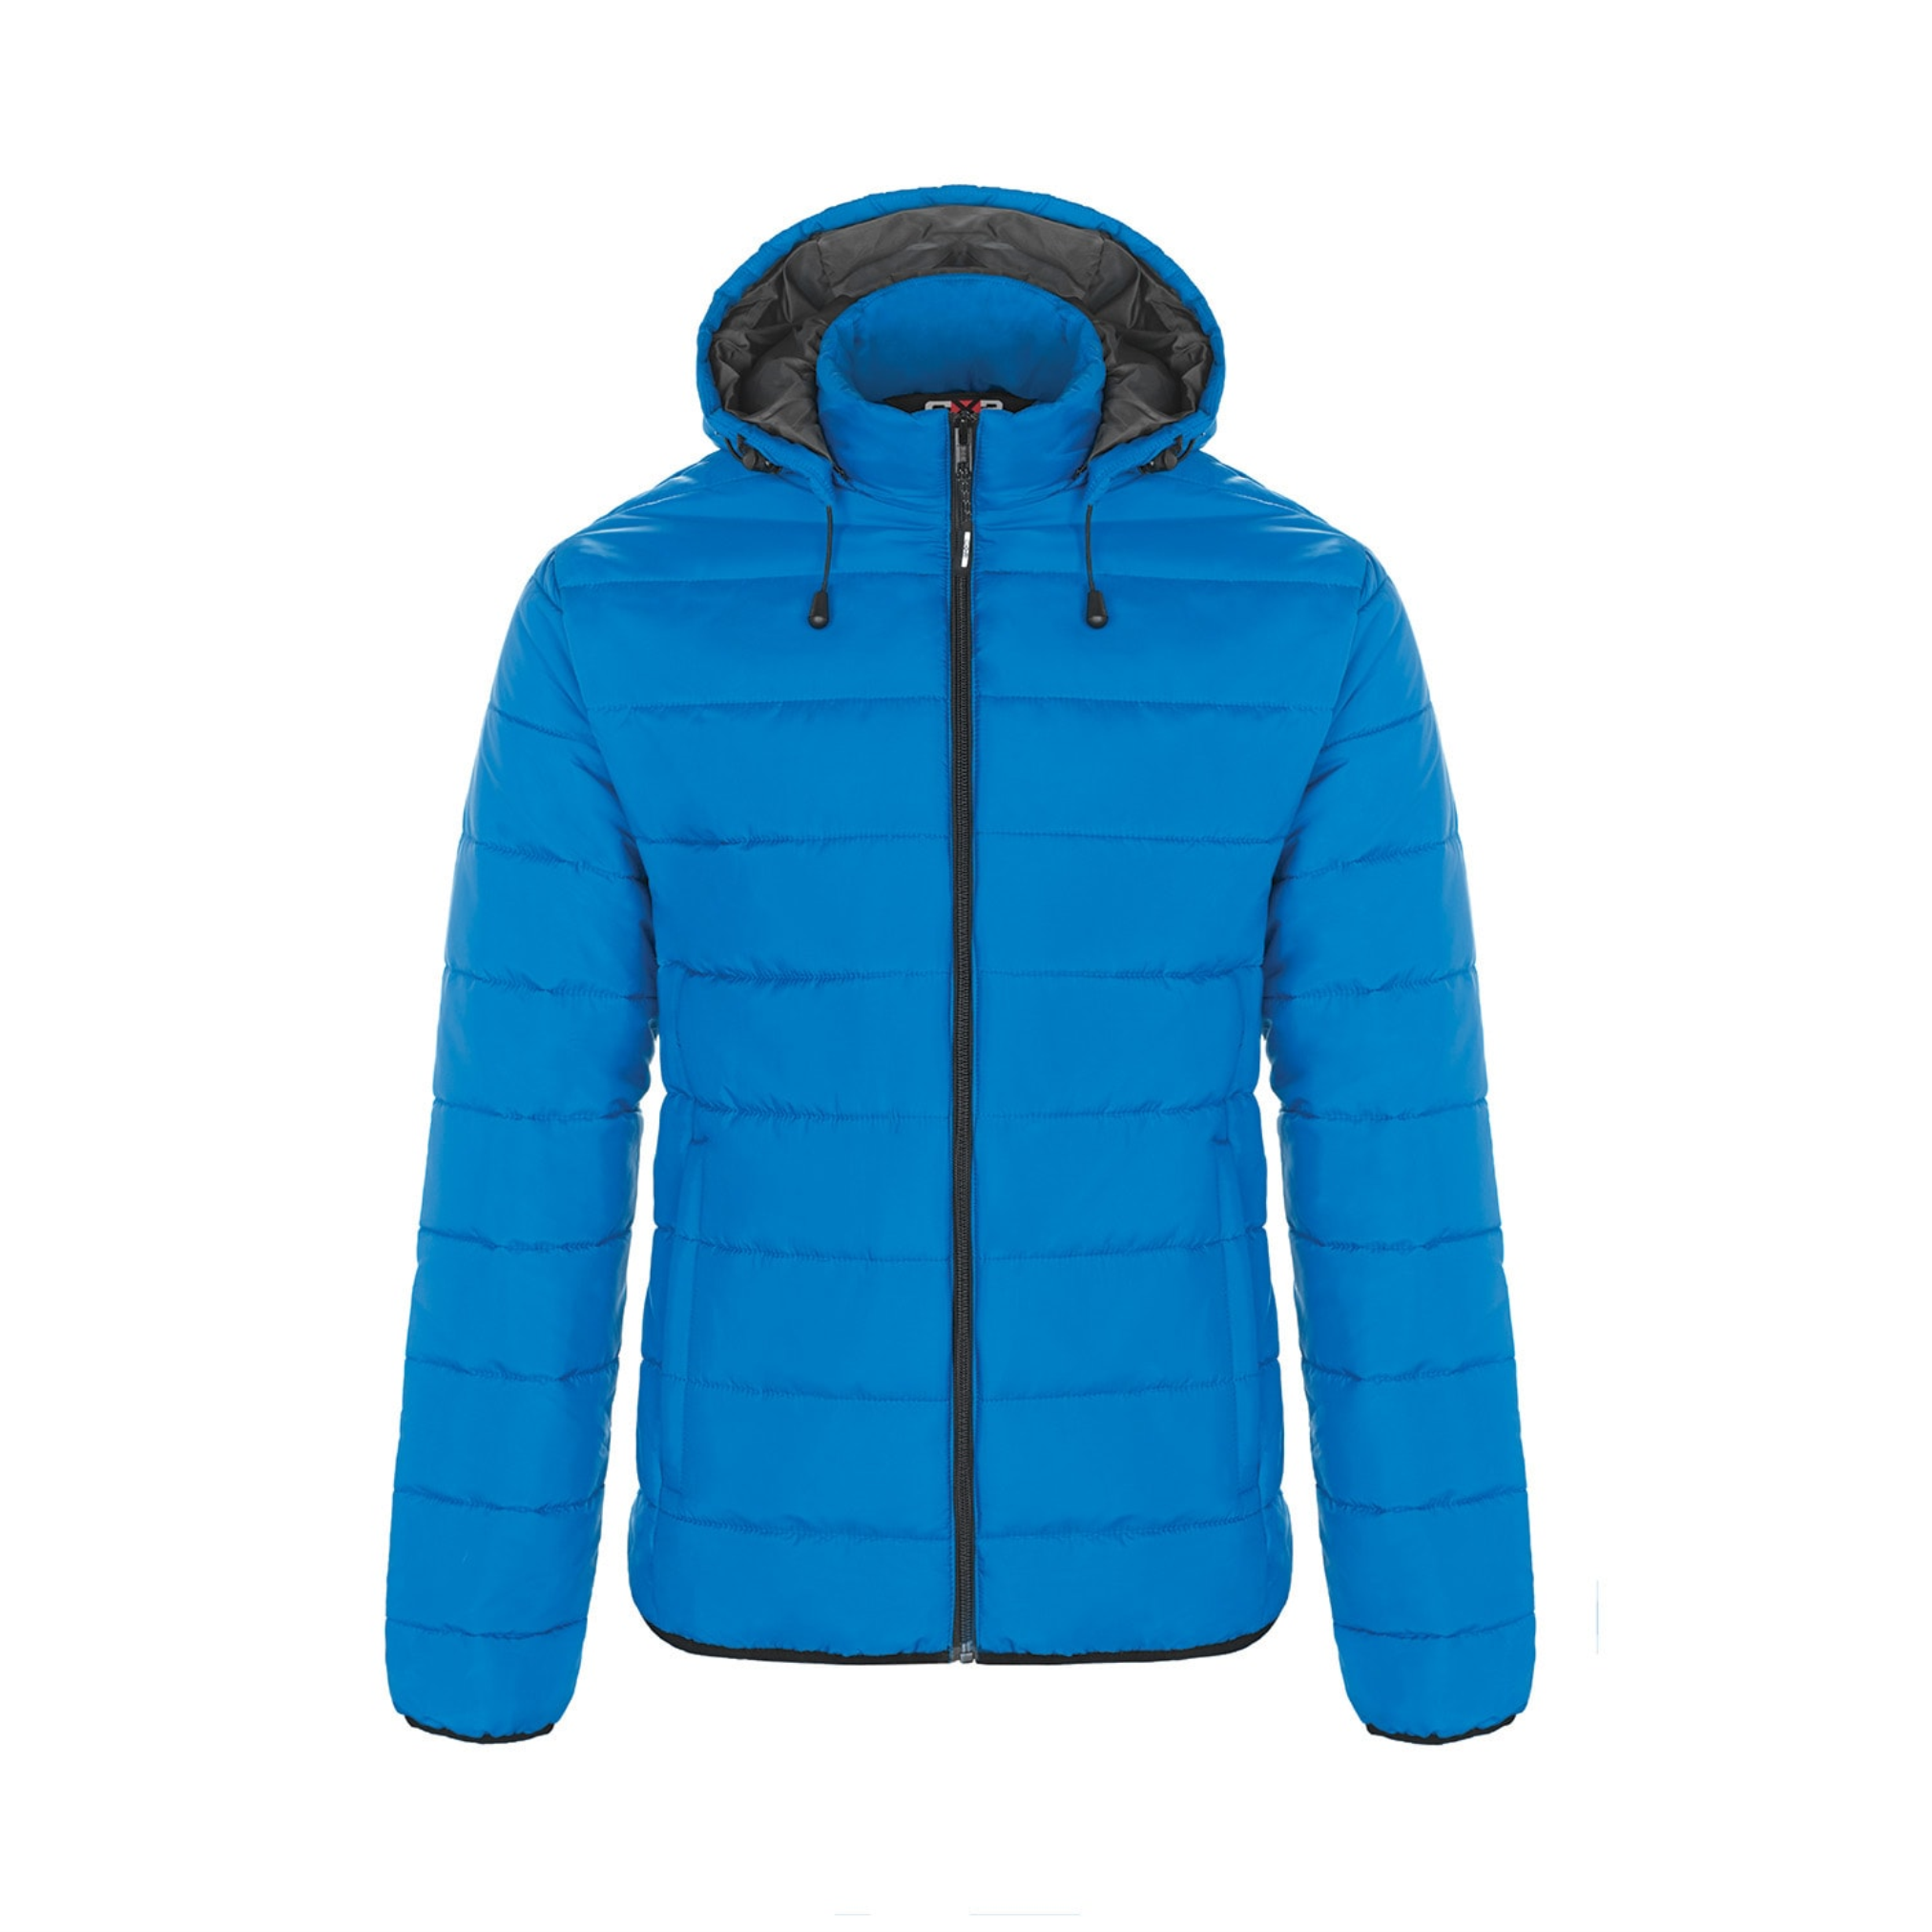 Glacial - Puffy Ladies Jacket With Detachable Hood - CX2 L00981